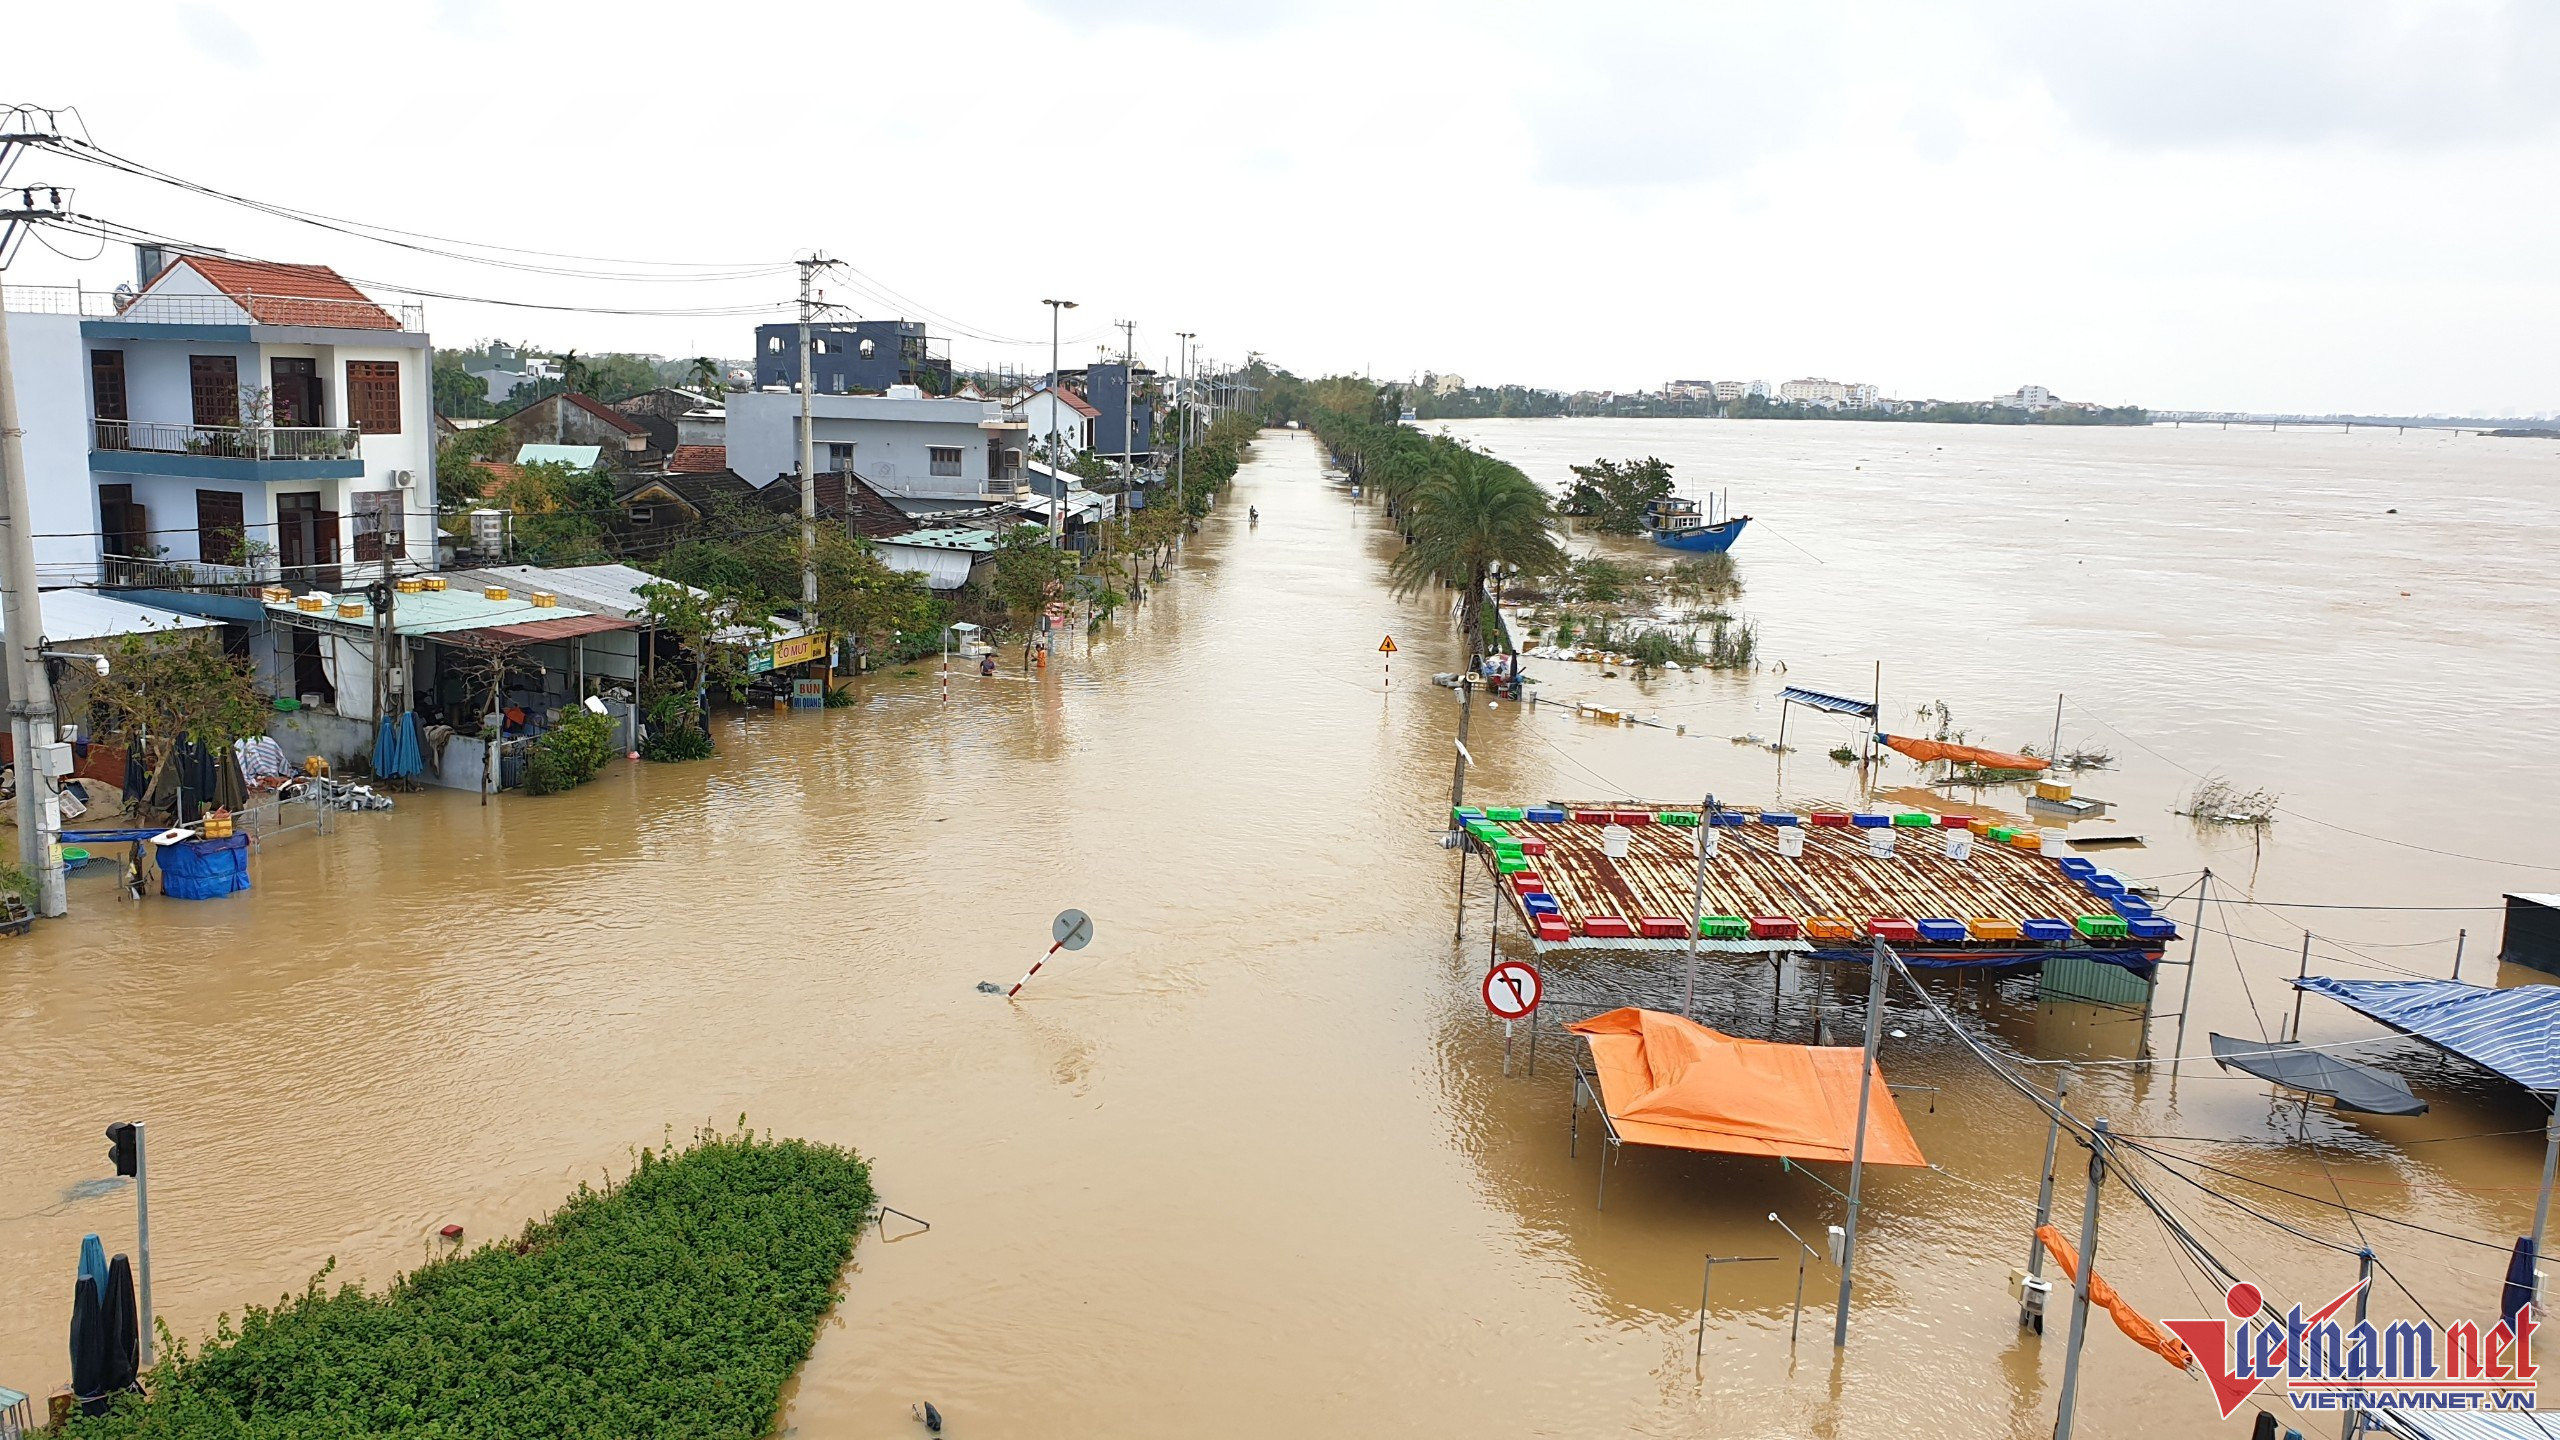 Heavy Rains Isolate Many Areas In Central Vietnam